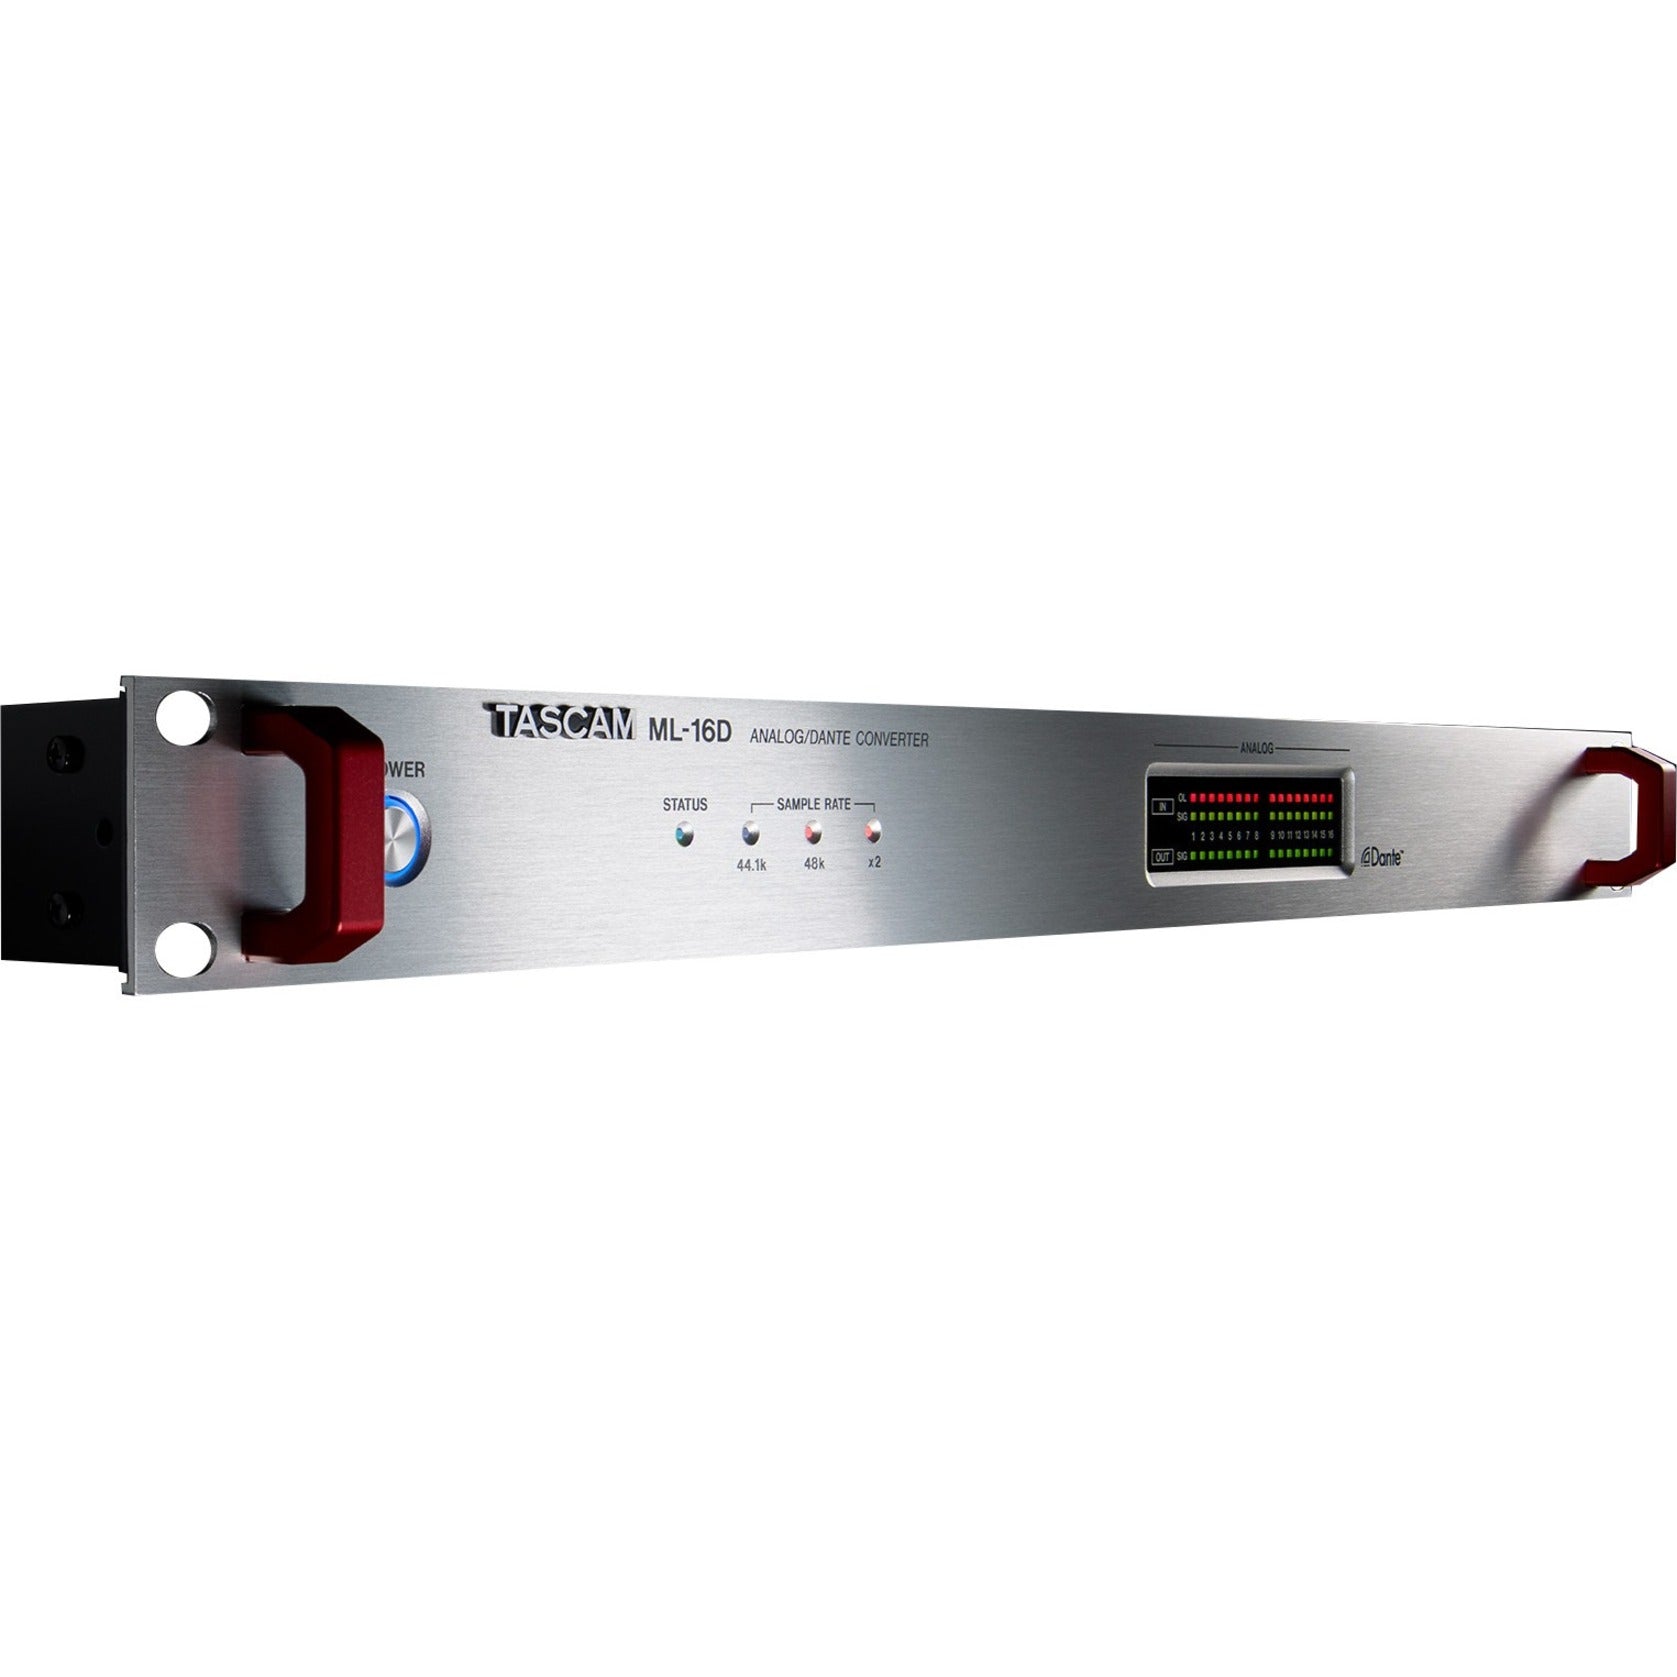 TASCAM ML-16D 16-channel Analog/Dante Converter, High-Quality Audio Conversion for Professional Recording